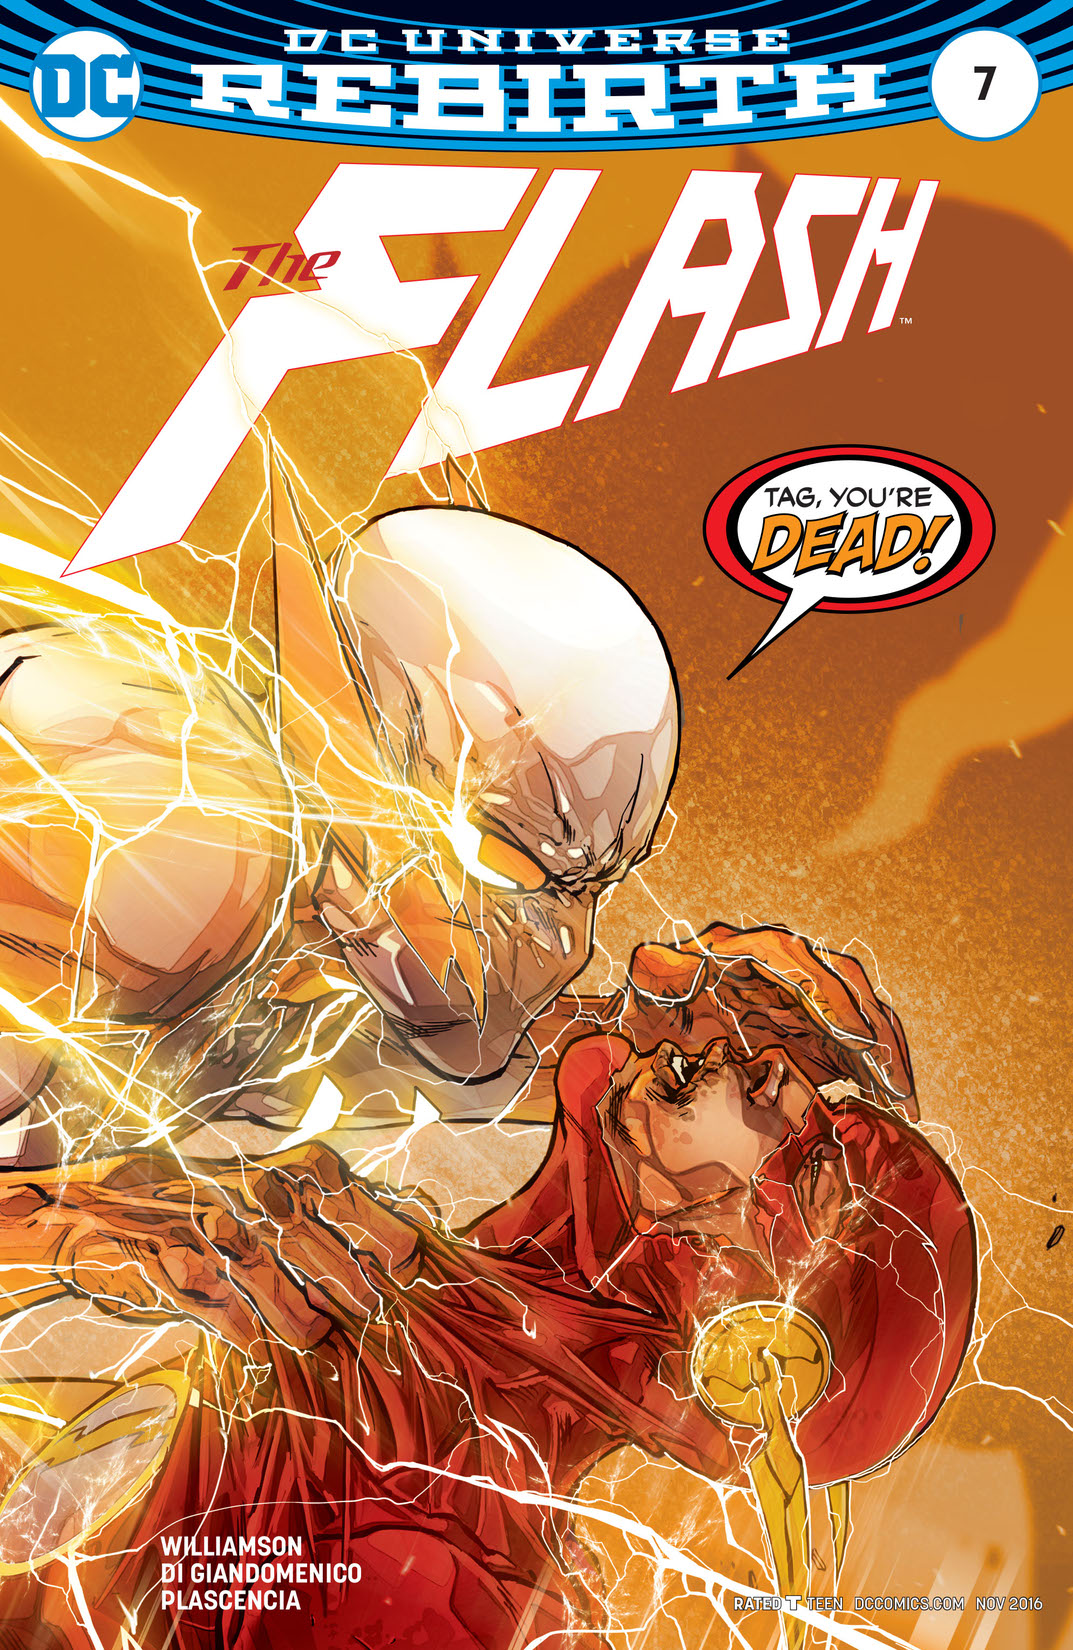 The Flash (2016-) #7 preview images